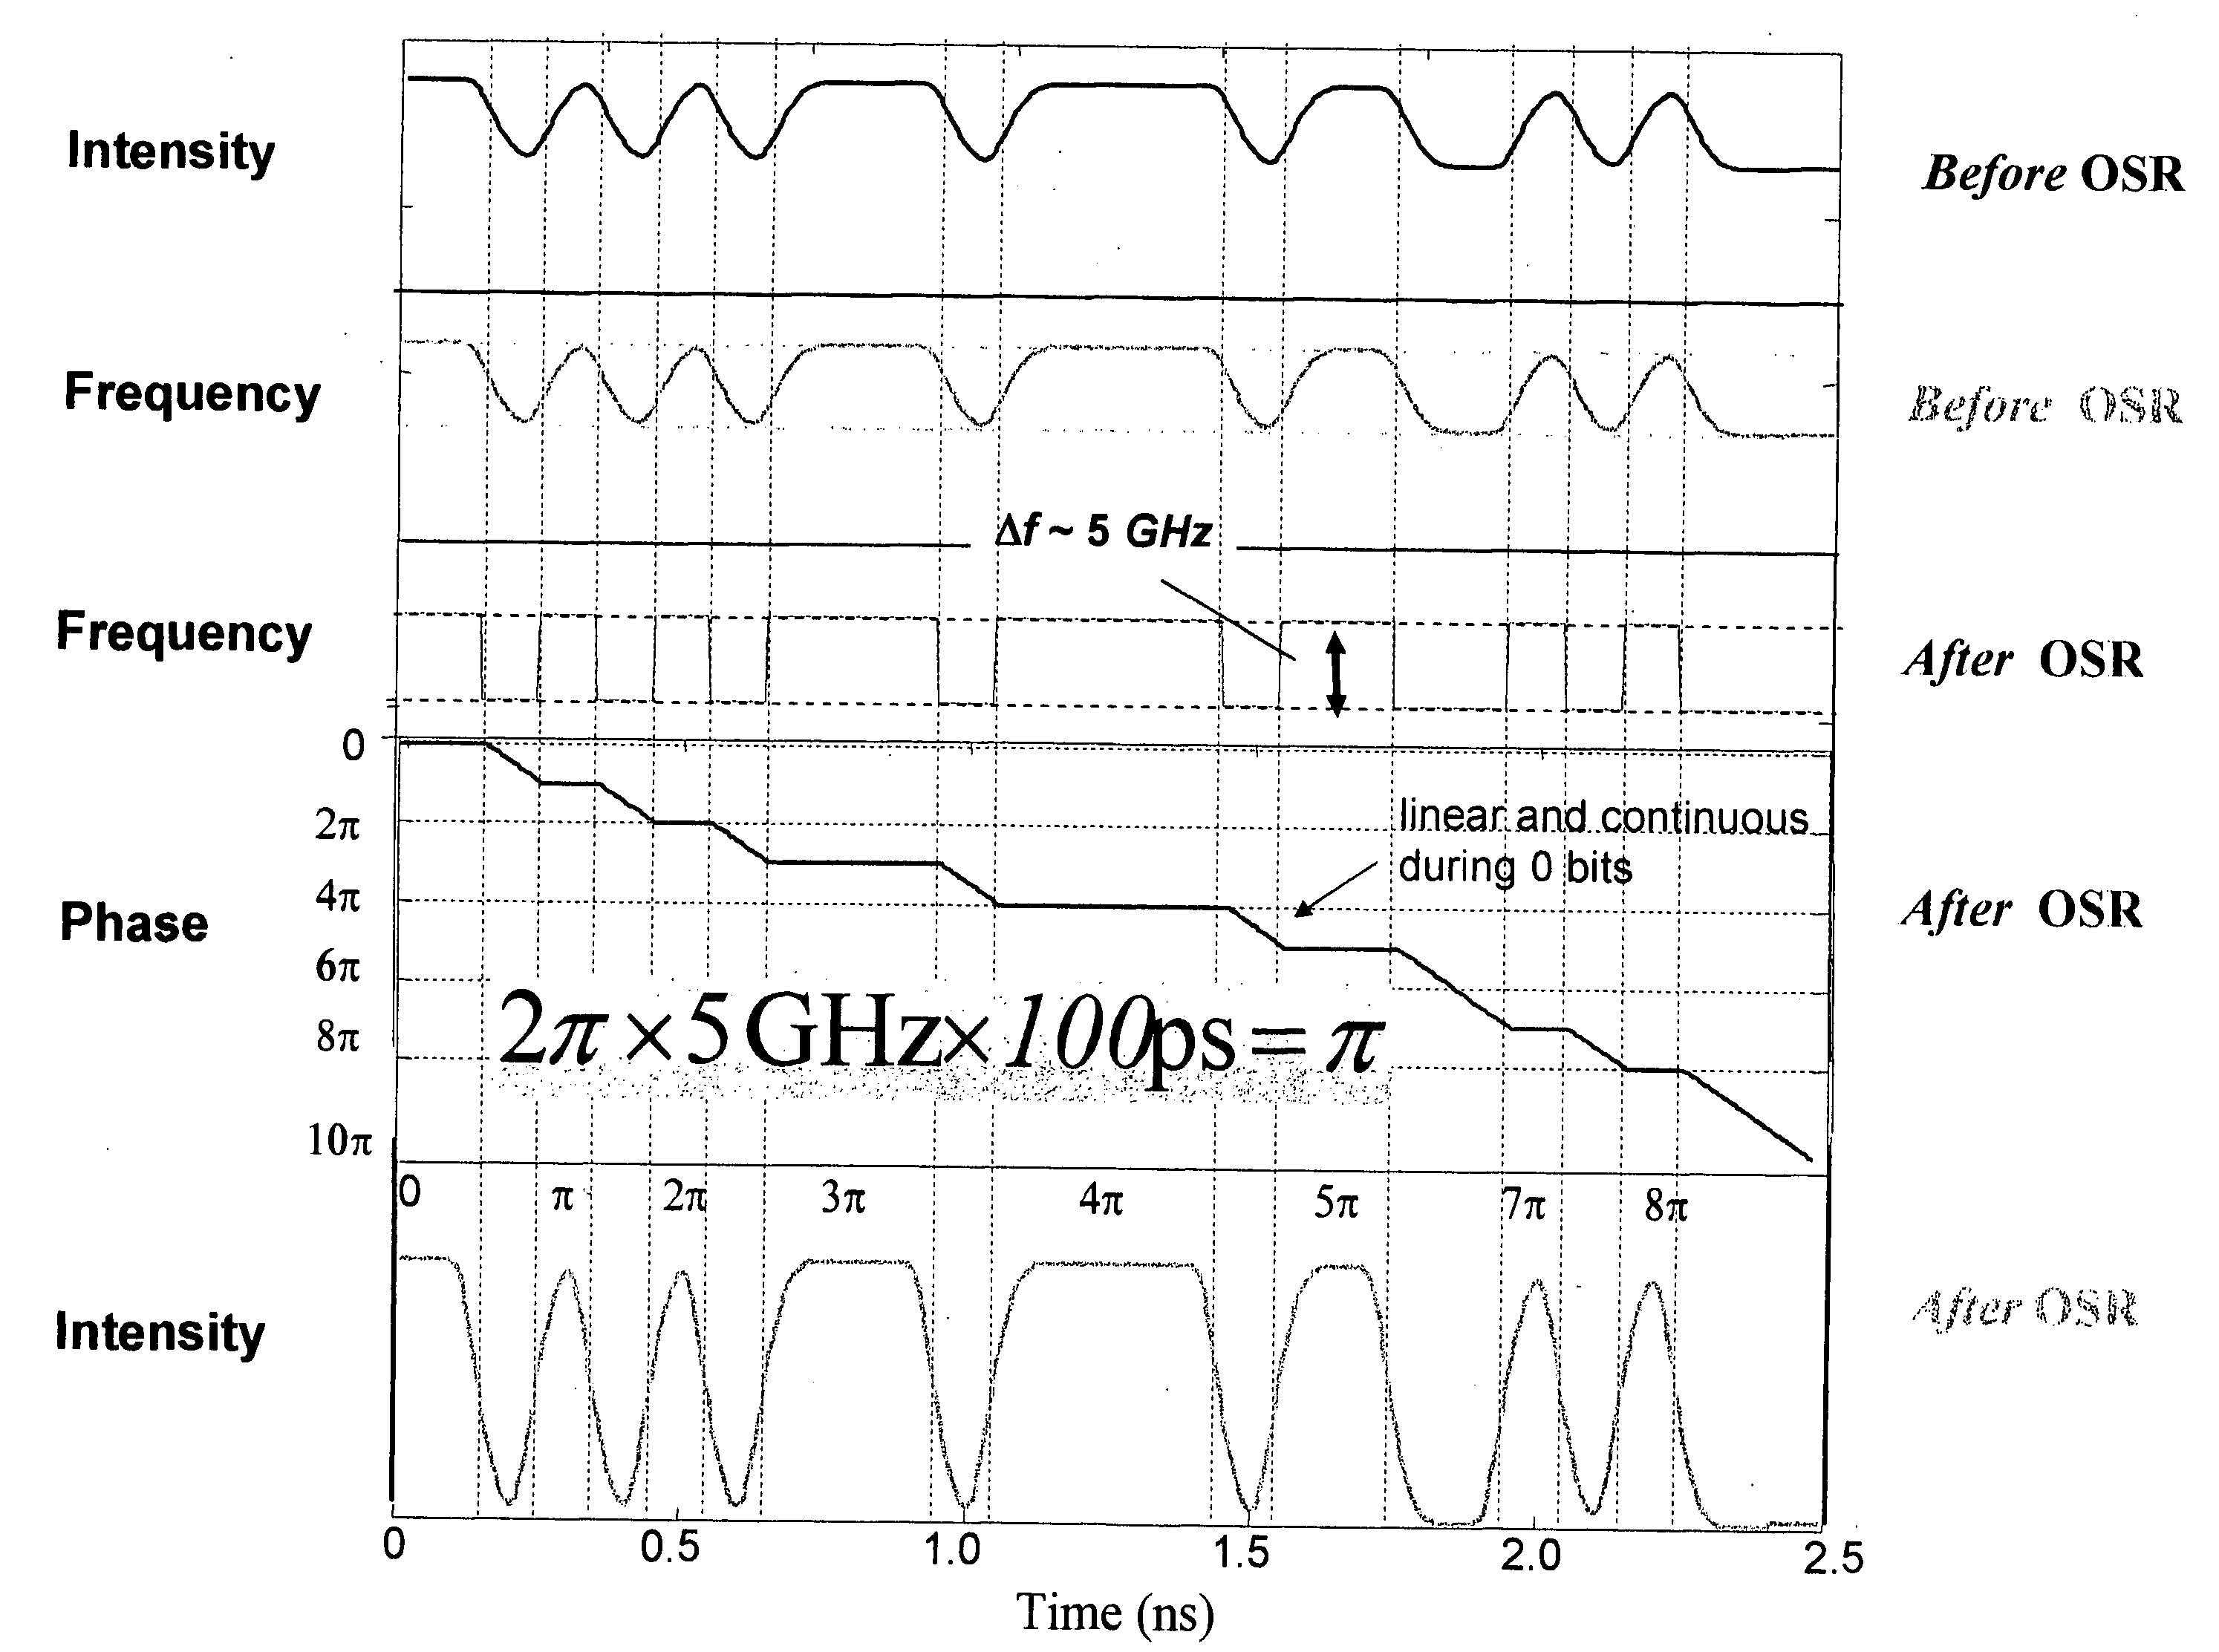 Method and apparatus for transmitting a signal using simultaneous FM and AM modulation